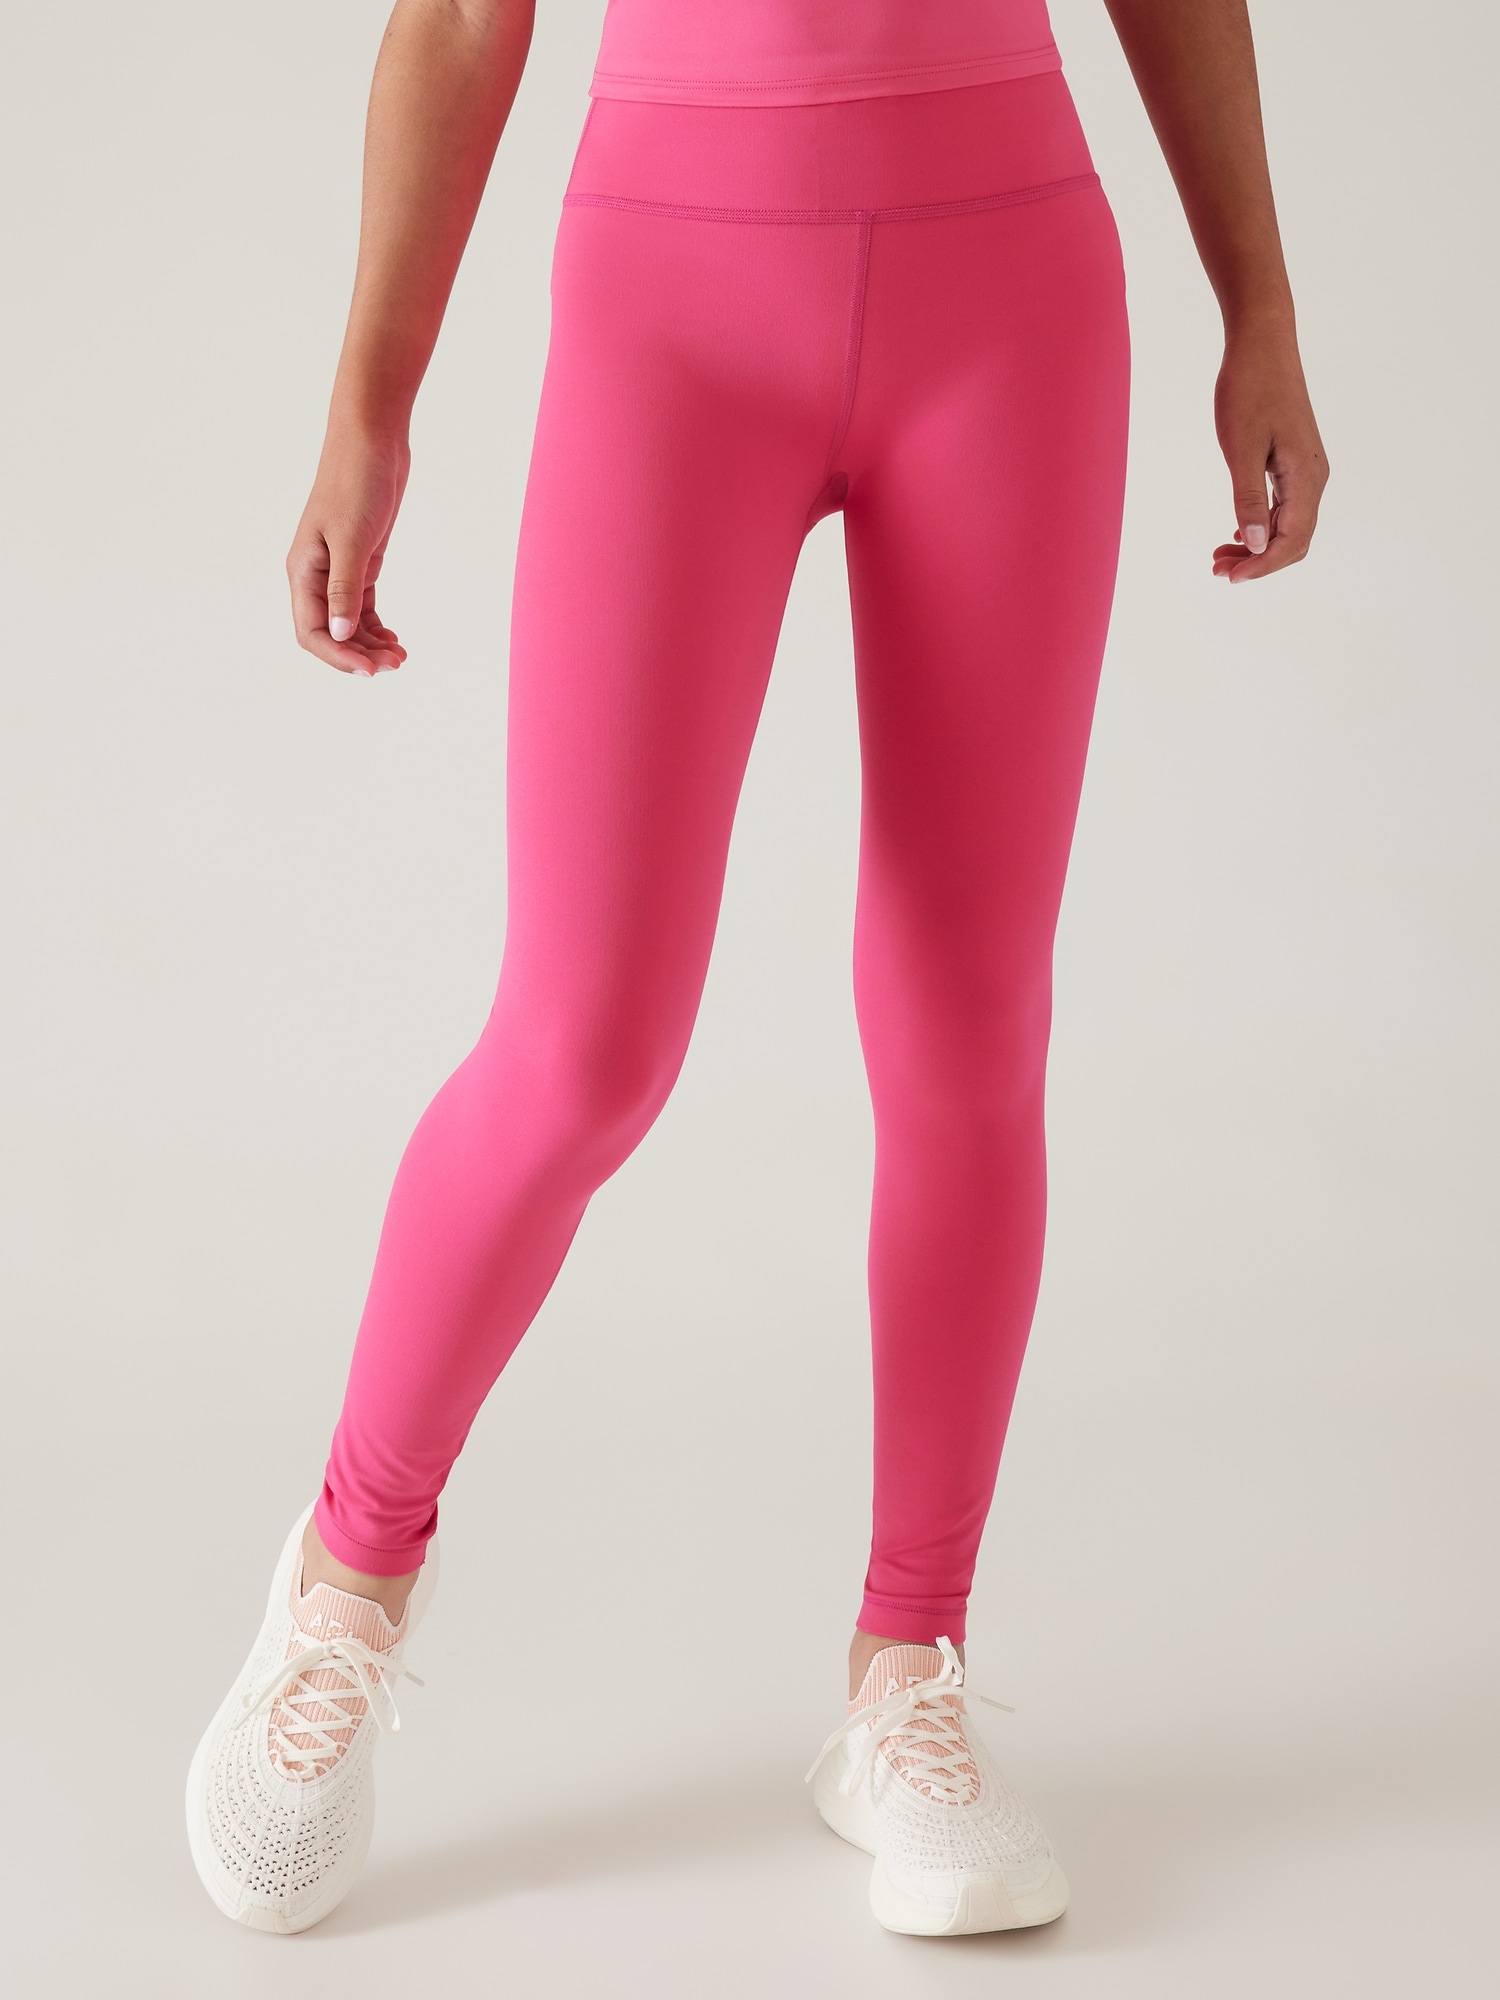 Athleta Girl Spacedye Chit Chat Tight  Girls sports clothes, Leggings  fashion, Sport outfits